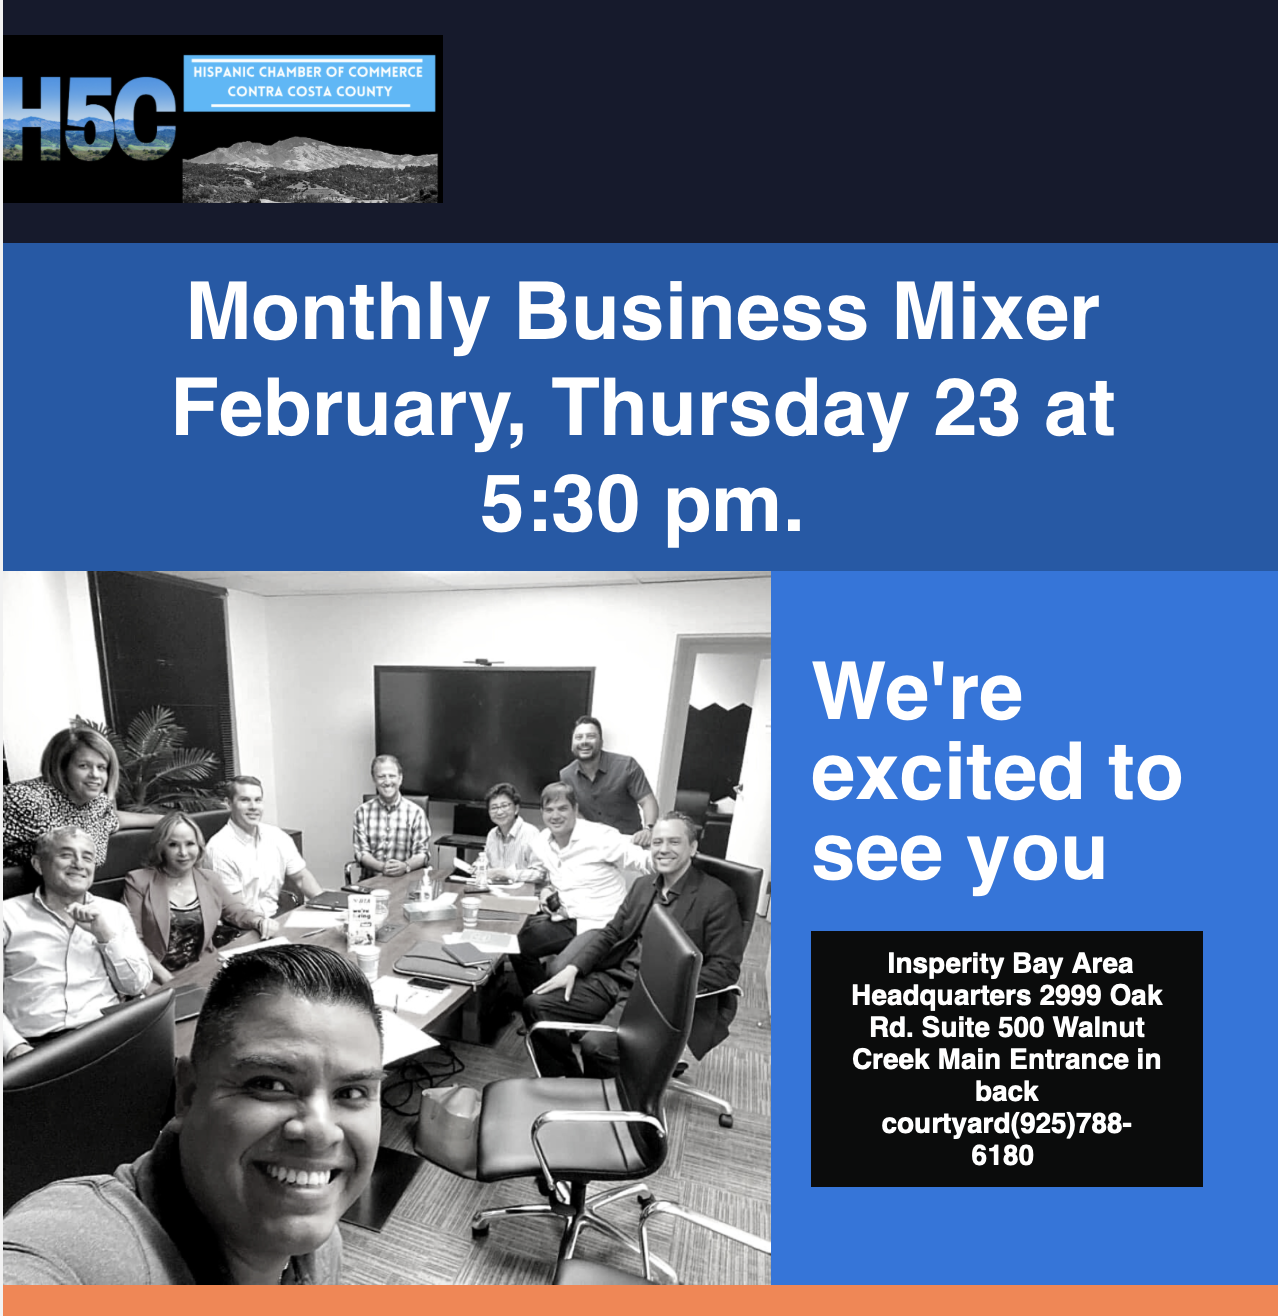 Monthly Business Mixer